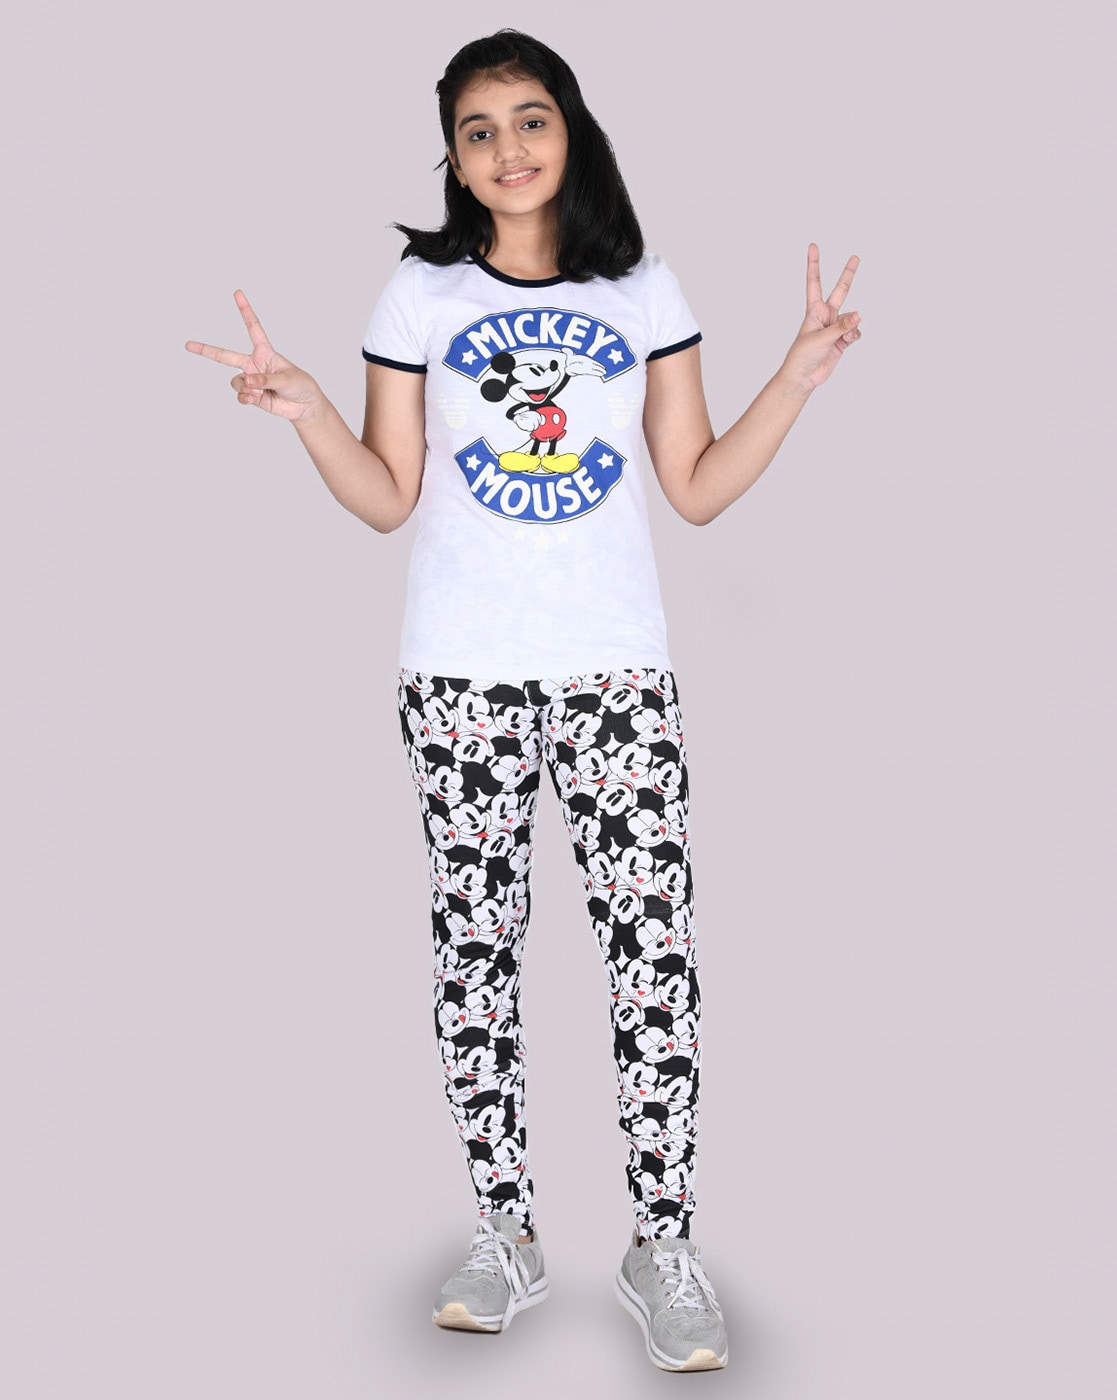 Disney© Mickey Mouse Gender-Neutral Pajamas for Adults | Old Navy